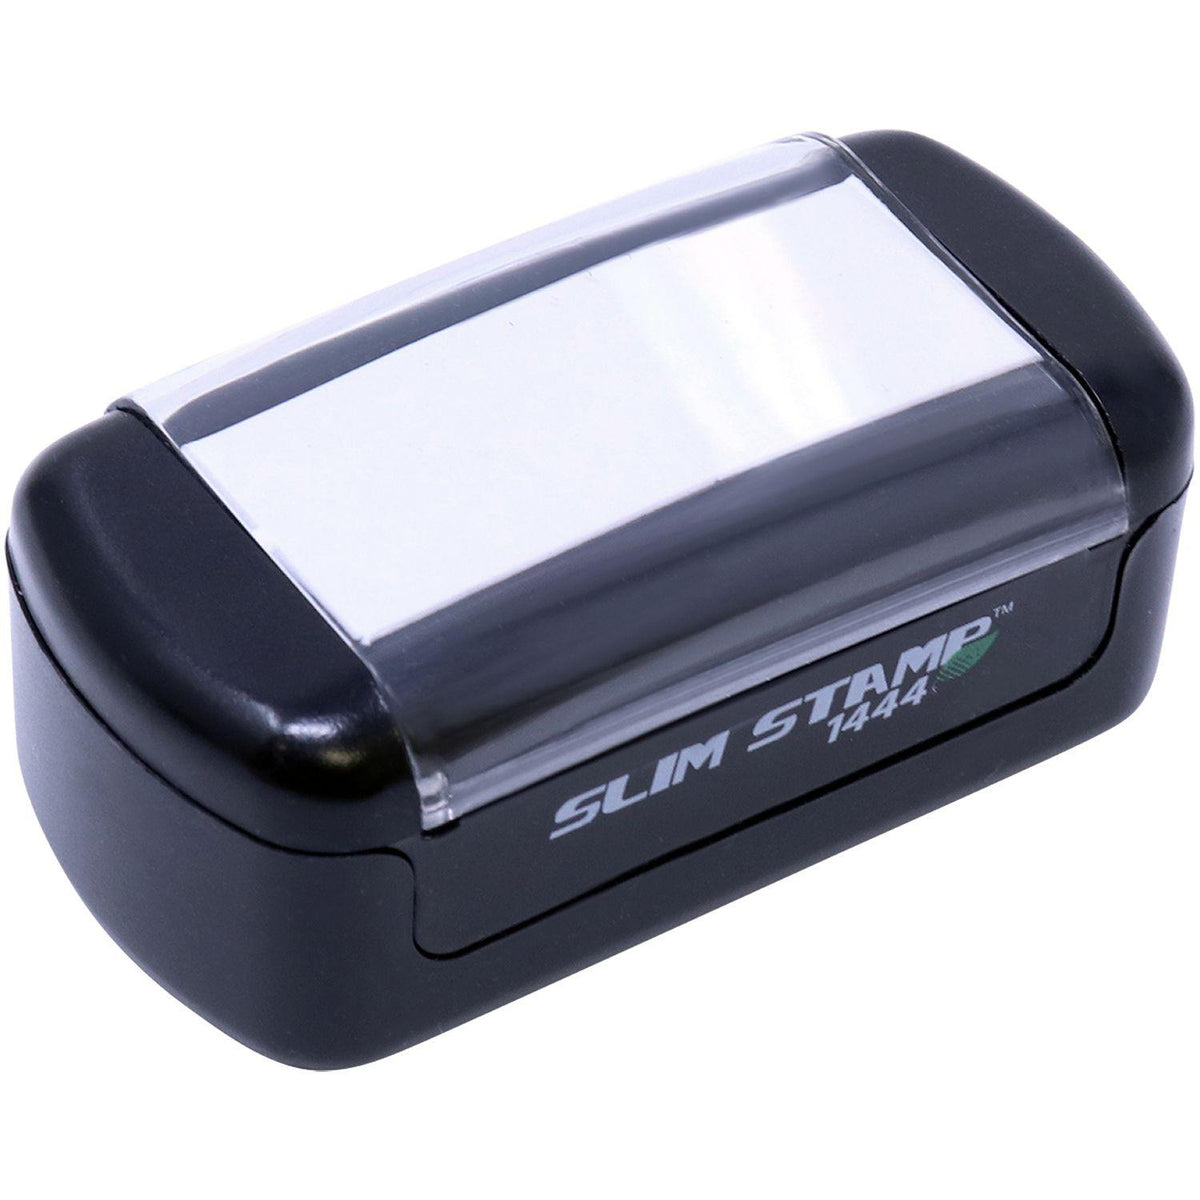 Slim Pre-Inked Acreditado Stamp - Engineer Seal Stamps - Brand_Slim, Impression Size_Small, Stamp Type_Pre-Inked Stamp, Type of Use_Mailing, Type of Use_Office, Type of Use_Professional